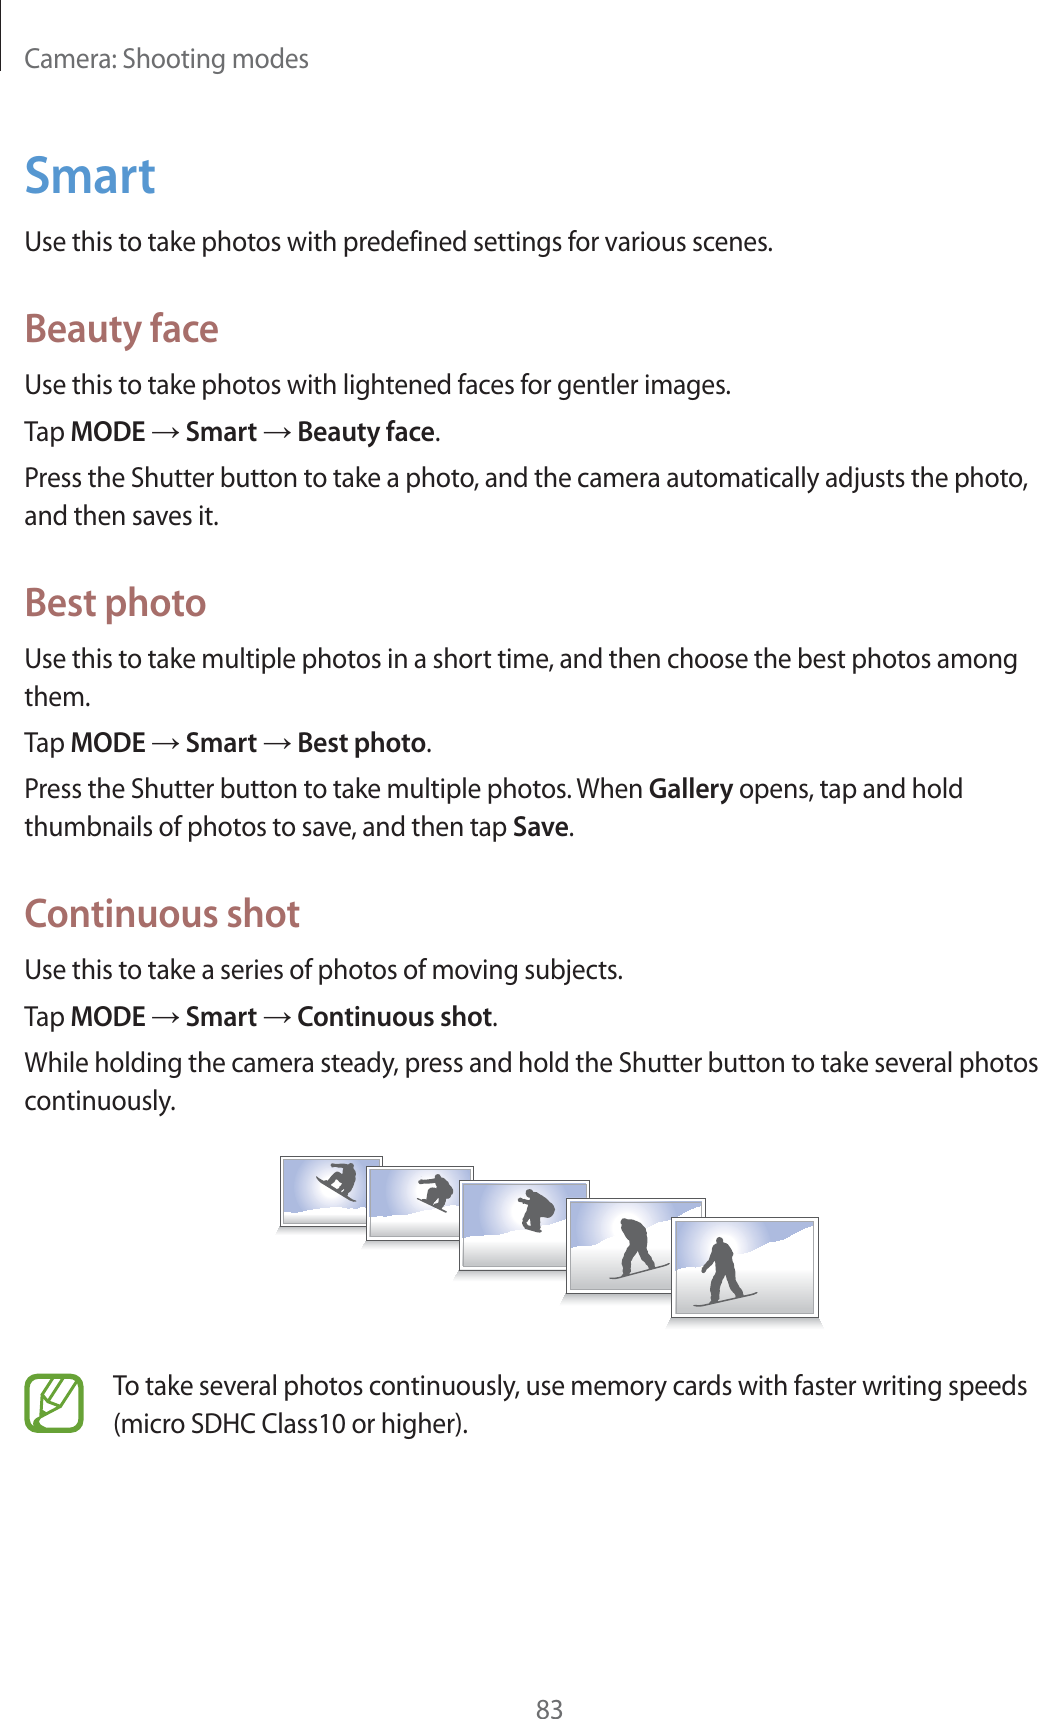 Camera: Shooting modes83SmartUse this to take photos with predefined settings for various scenes.Beauty faceUse this to take photos with lightened faces for gentler images.Tap MODE  Smart  Beauty face.Press the Shutter button to take a photo, and the camera automatically adjusts the photo, and then saves it.Best photoUse this to take multiple photos in a short time, and then choose the best photos among them.Tap MODE  Smart  Best photo.Press the Shutter button to take multiple photos. When Gallery opens, tap and hold thumbnails of photos to save, and then tap Save.Continuous shotUse this to take a series of photos of moving subjects.Tap MODE  Smart  Continuous shot.While holding the camera steady, press and hold the Shutter button to take several photos continuously.To take several photos continuously, use memory cards with faster writing speeds (micro SDHC Class10 or higher).